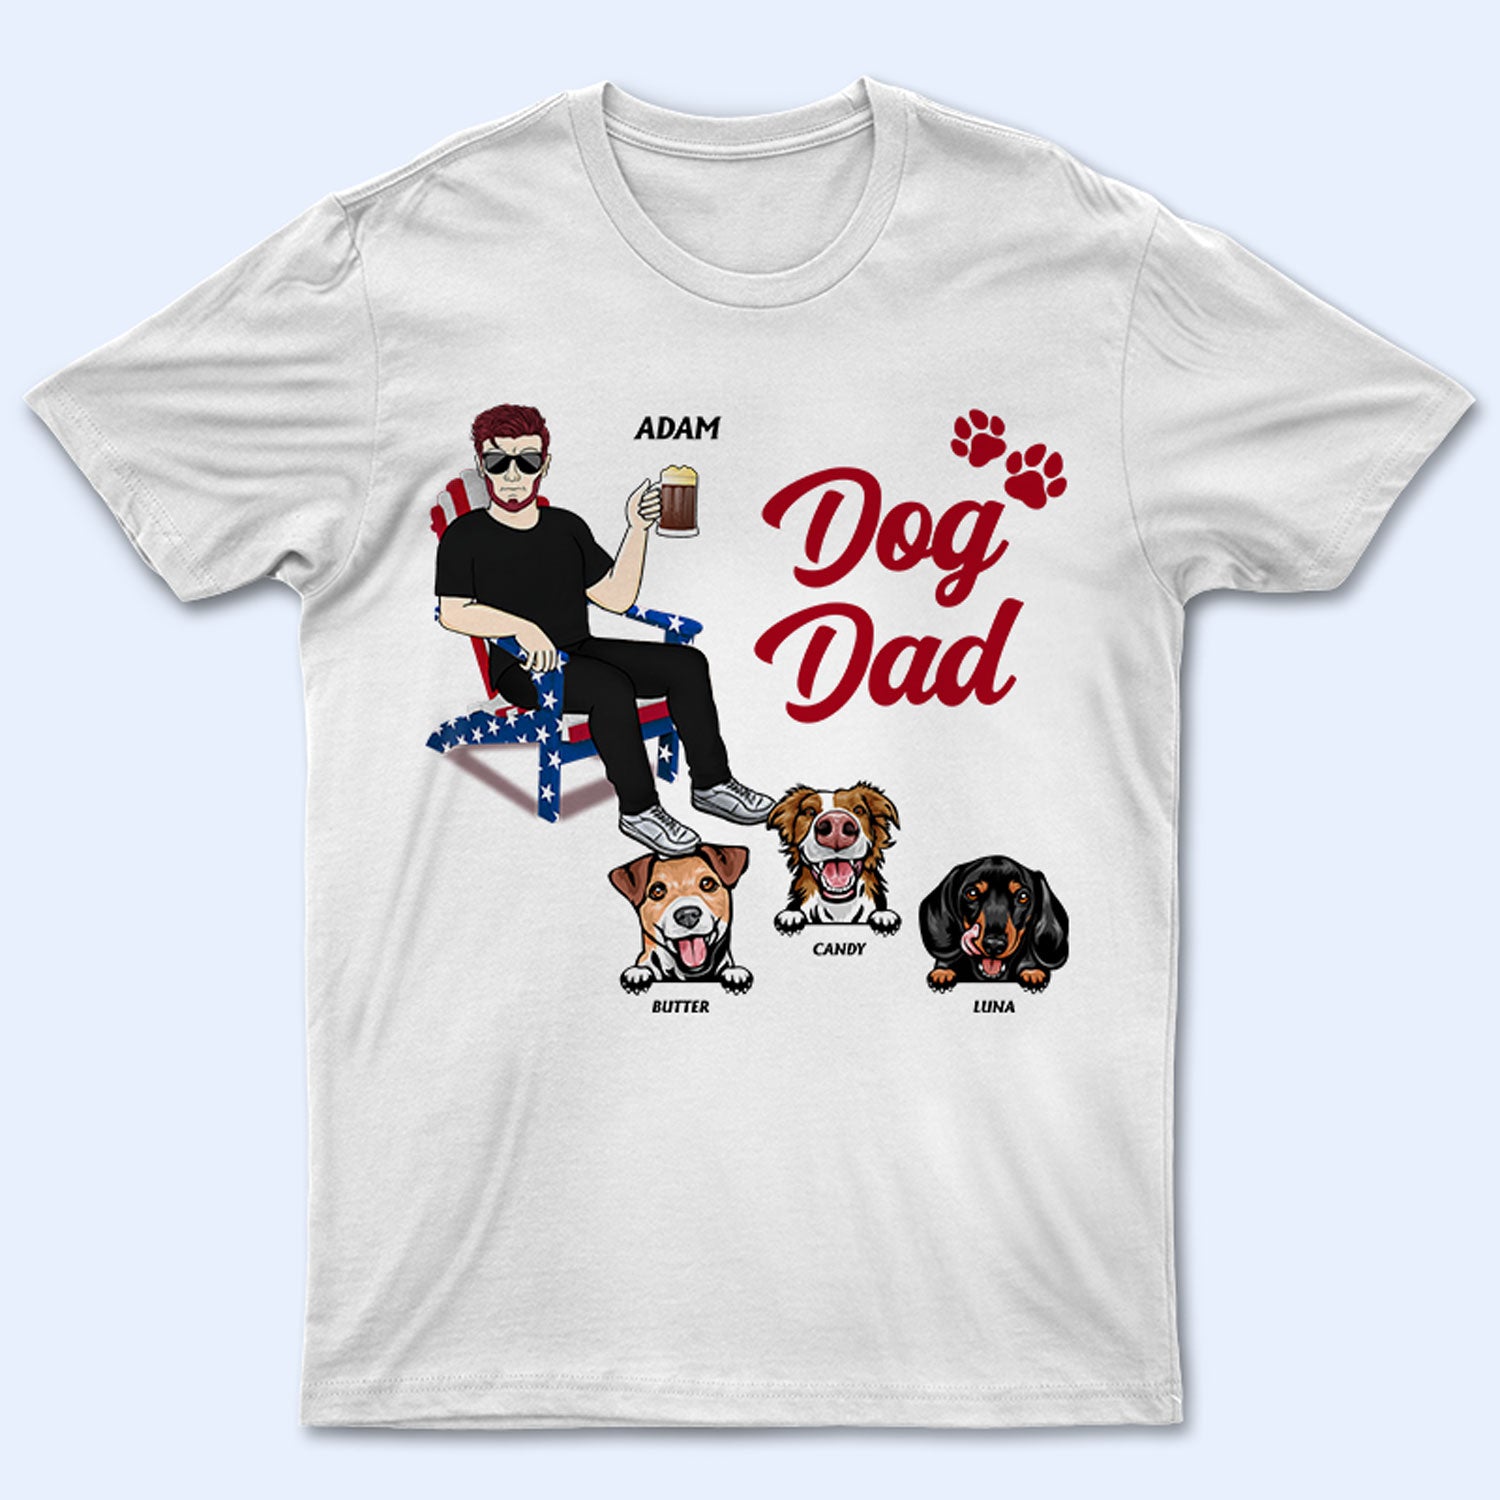 Dog Dad - Gift For Father, Dad, Grandpa, Dog Lovers - Personalized Custom T Shirt